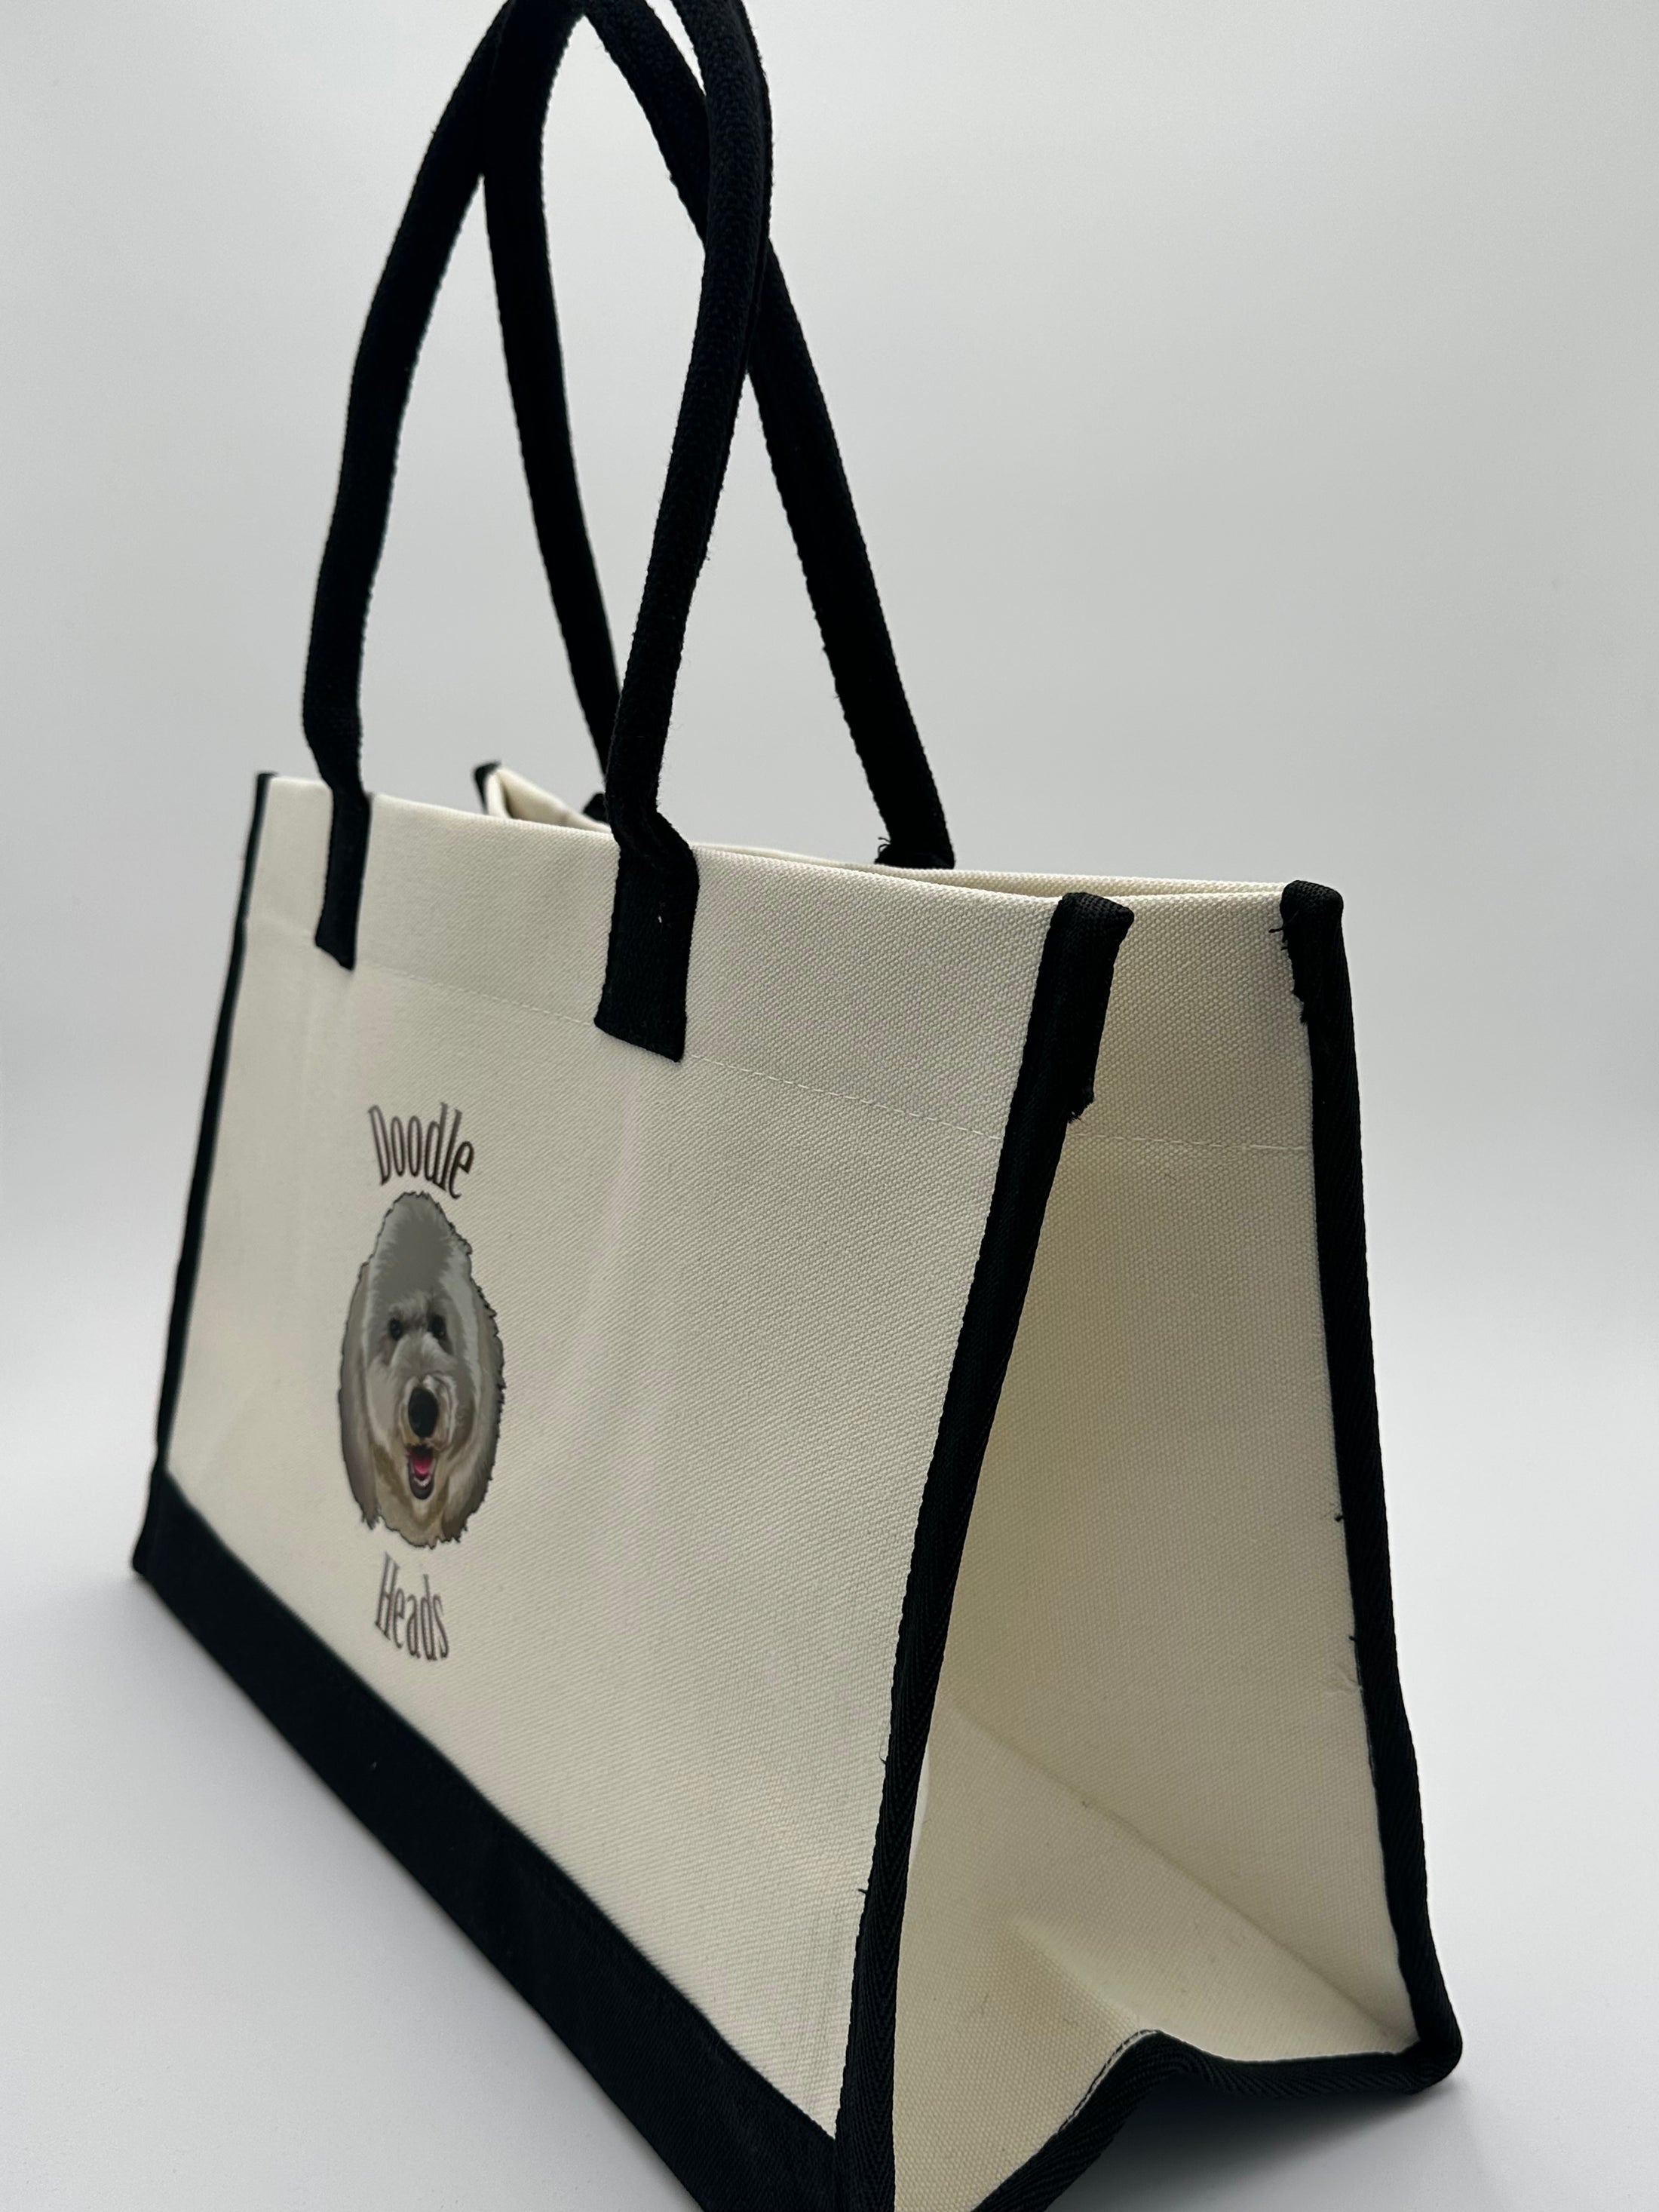 The Medium Tote Bag by Doodle Heads